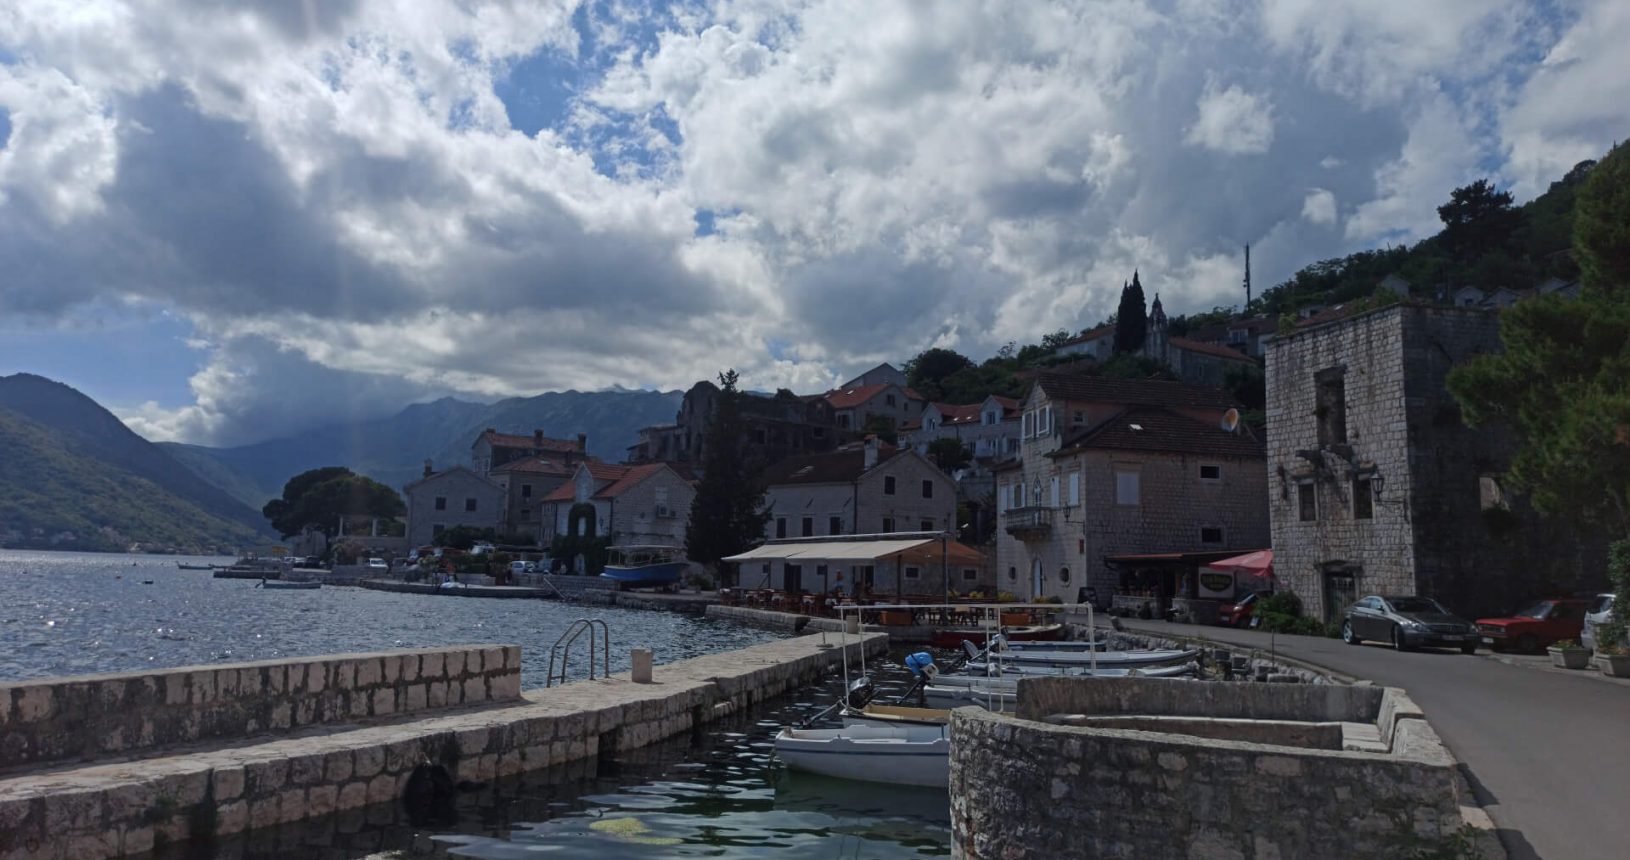 In love with nature and old town Perast